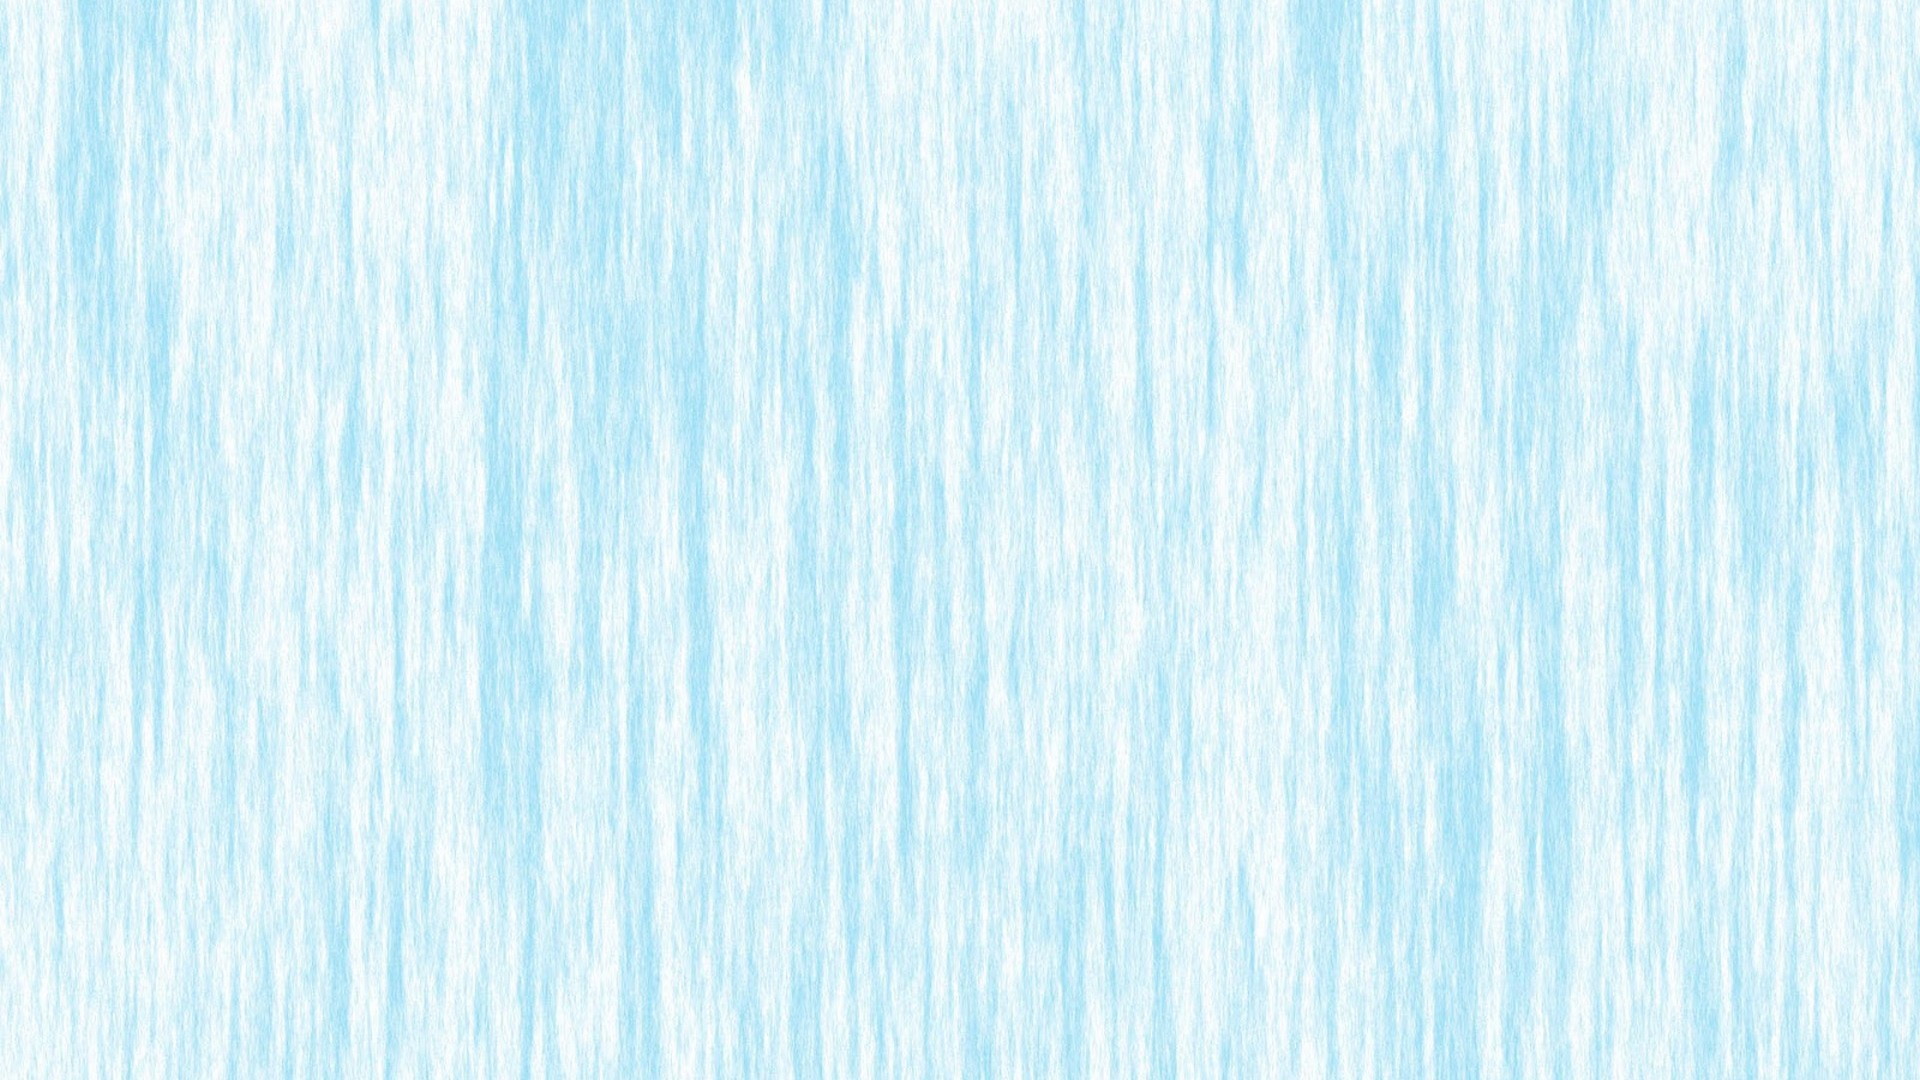 Cool Blue Wallpaper For Desktop with high-resolution 1920x1080 pixel. You can use this wallpaper for your Windows and Mac OS computers as well as your Android and iPhone smartphones